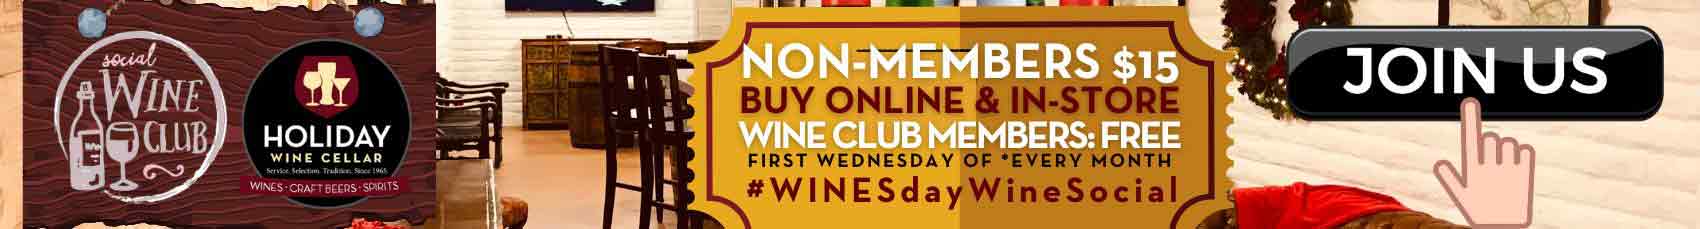 Wine Club Social on the FIRST WEDNESDAY (also referred to as #WINESday) inside HWC's Beverage Bunker - ALL WELCOME!